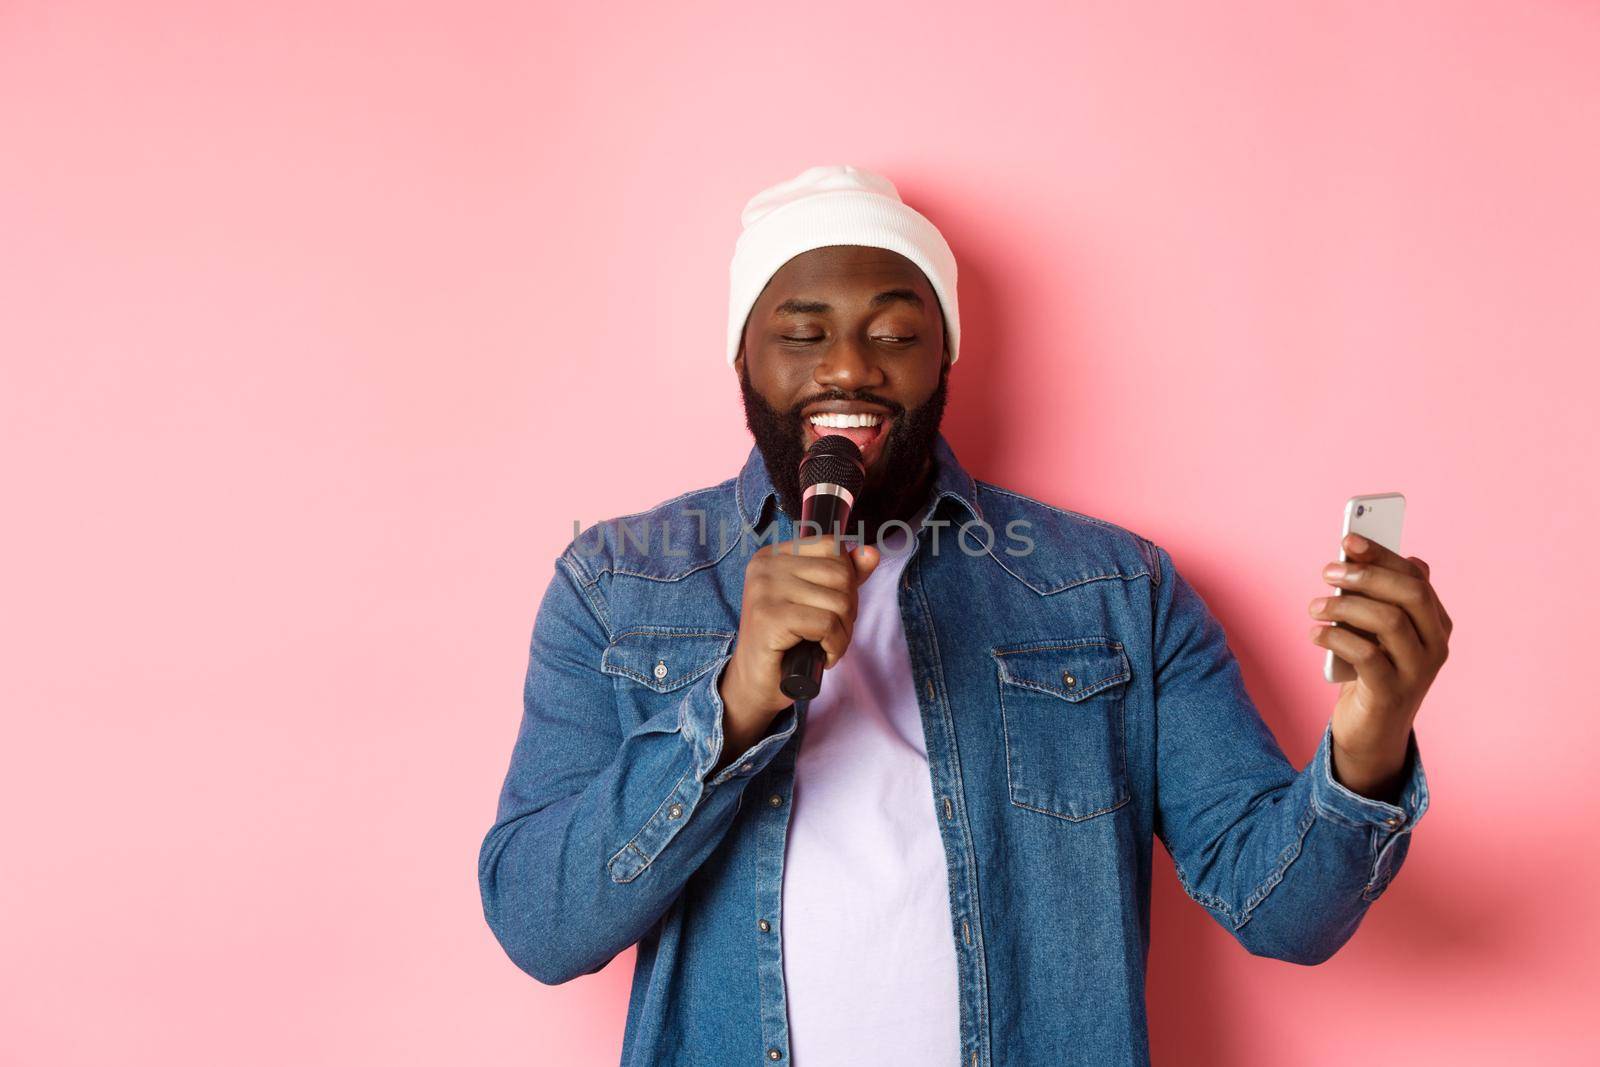 Handsome african-american man singing karaoke, reading lyrics on smartphone app and holding microphone, standing over pink background.